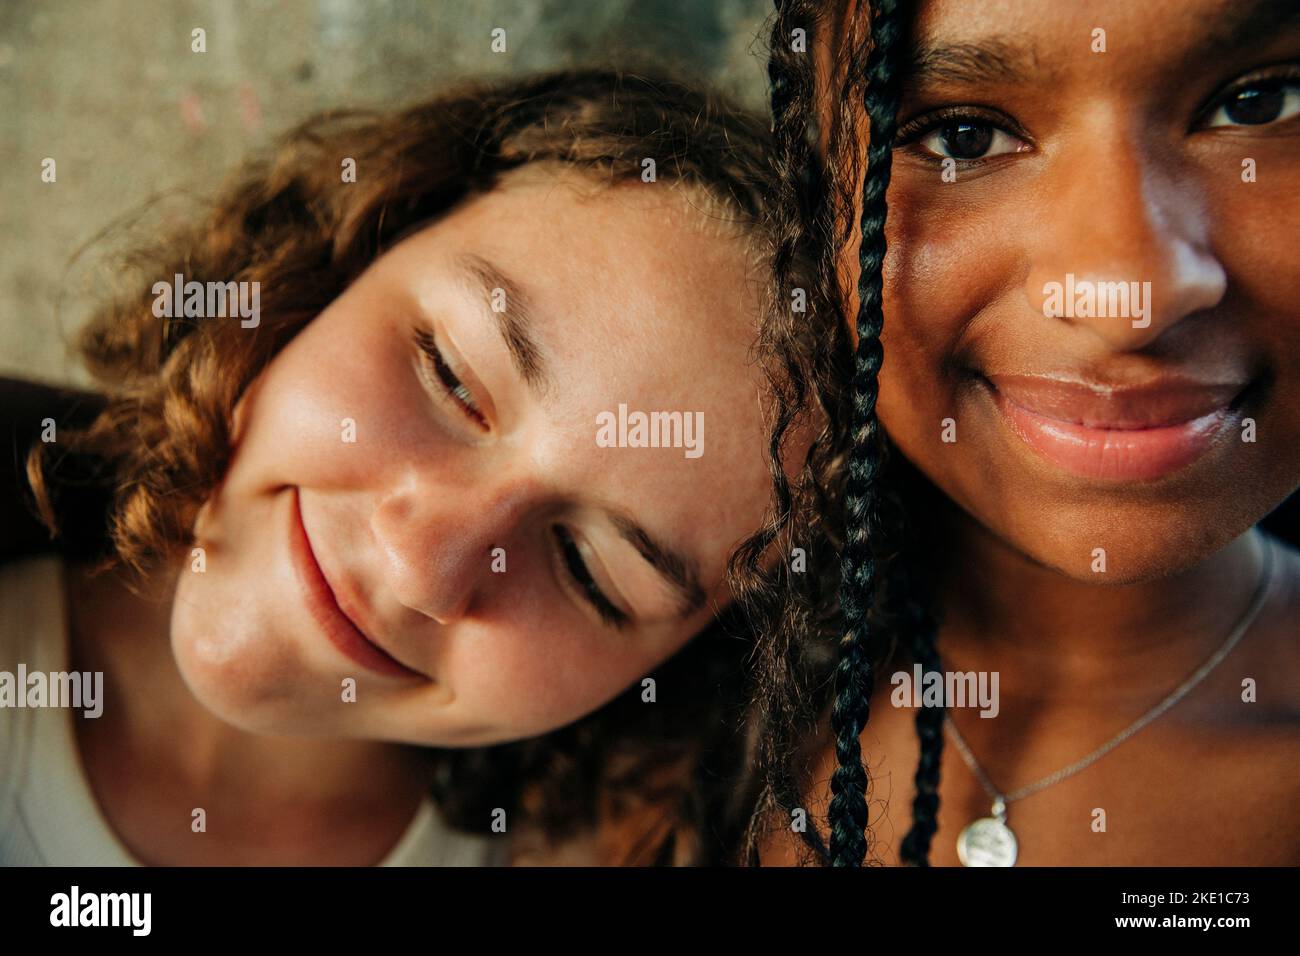 Thoughtful smiling teenage girl leaning head on female friend Stock Photo